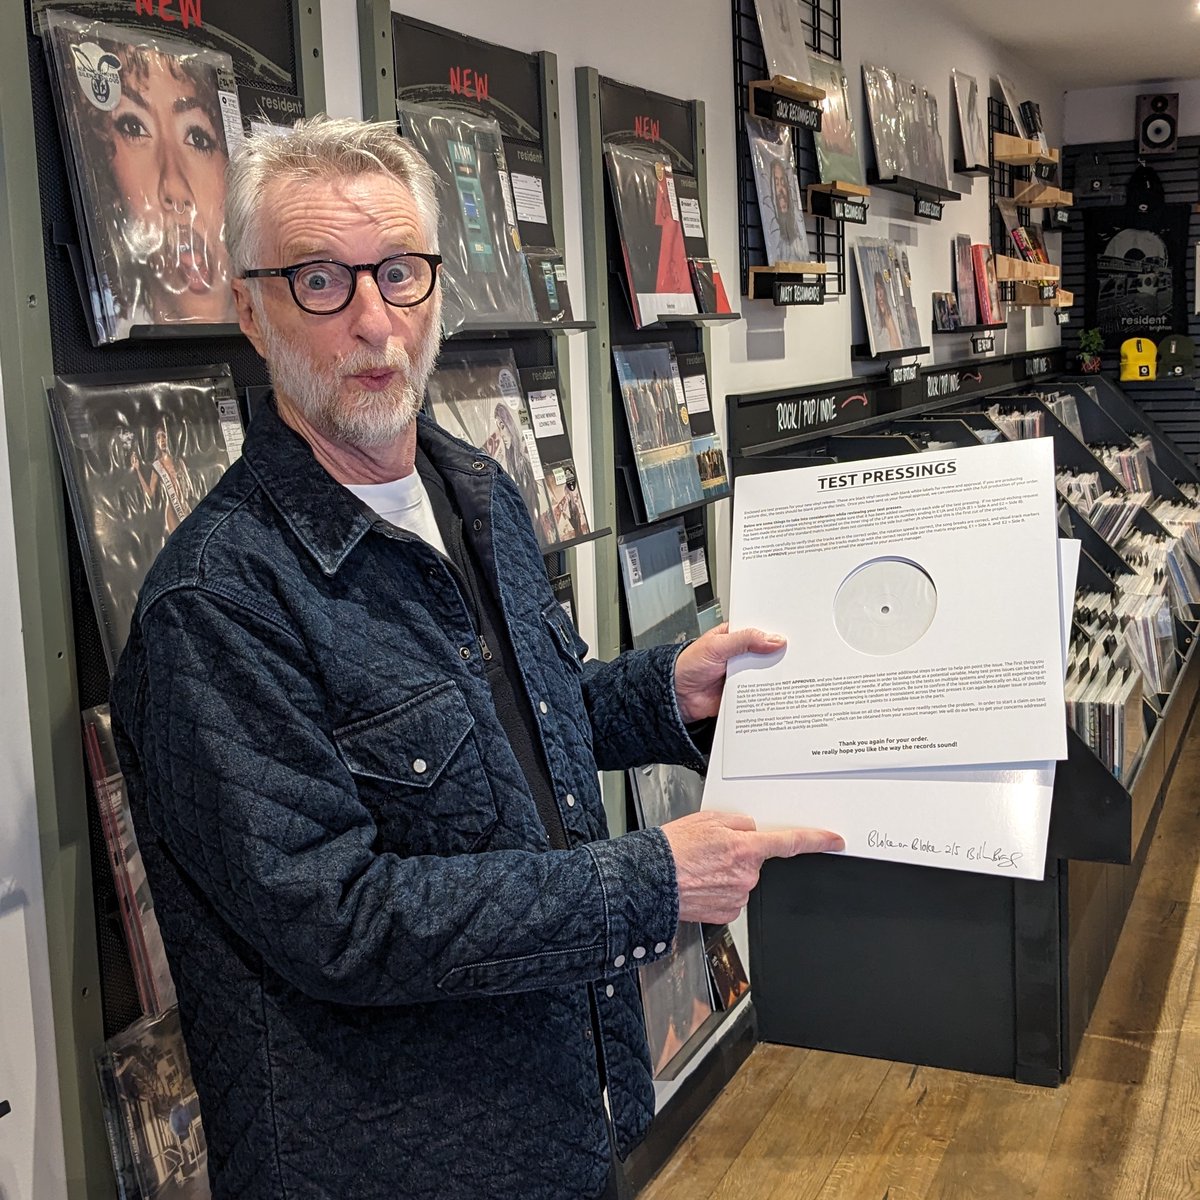 Look who just popped in! @billybragg can't wait for you to get your hands on his @RSDUK release 'Bloke On Bloke'! Priority entry to his 7pm performance will go to customers who pick up his album during the day, & 2 lucky customers will get a signed & numbered test press 😲